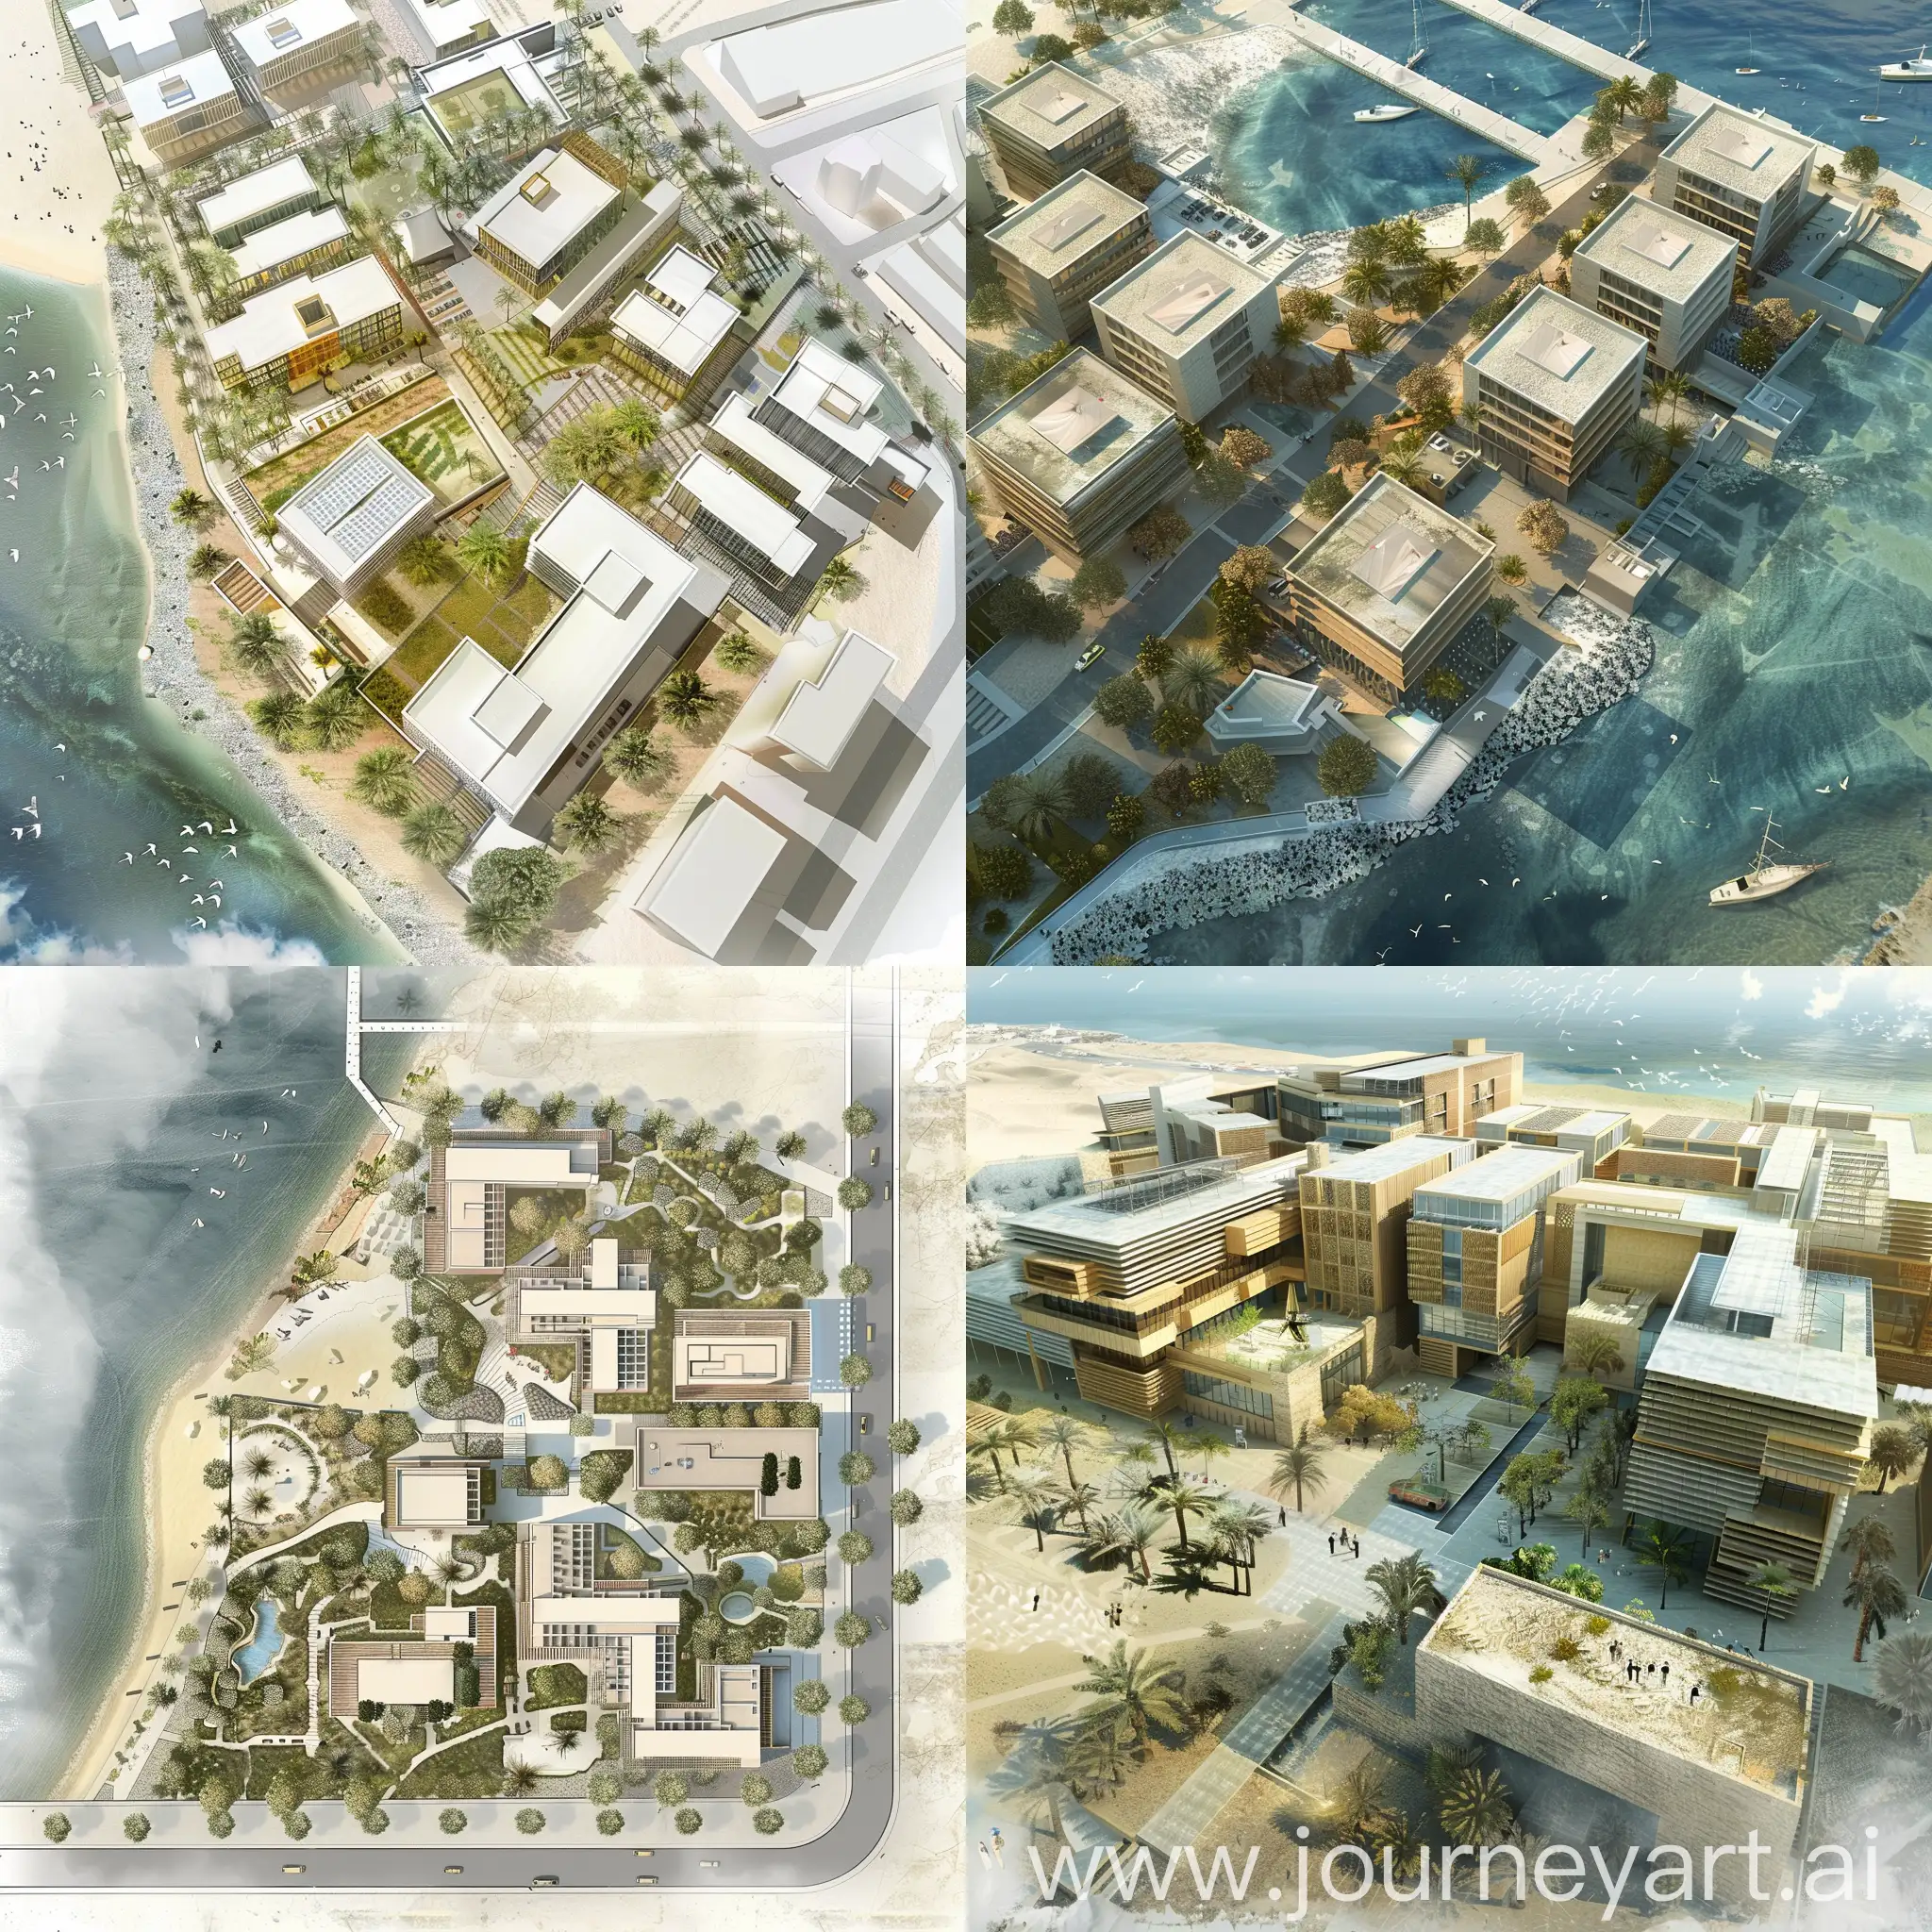 An architectural 2D plan for a business park in El Quseir is inspired by the region's maritime beauty and diverse commercial activities. The project comprises five buildings.